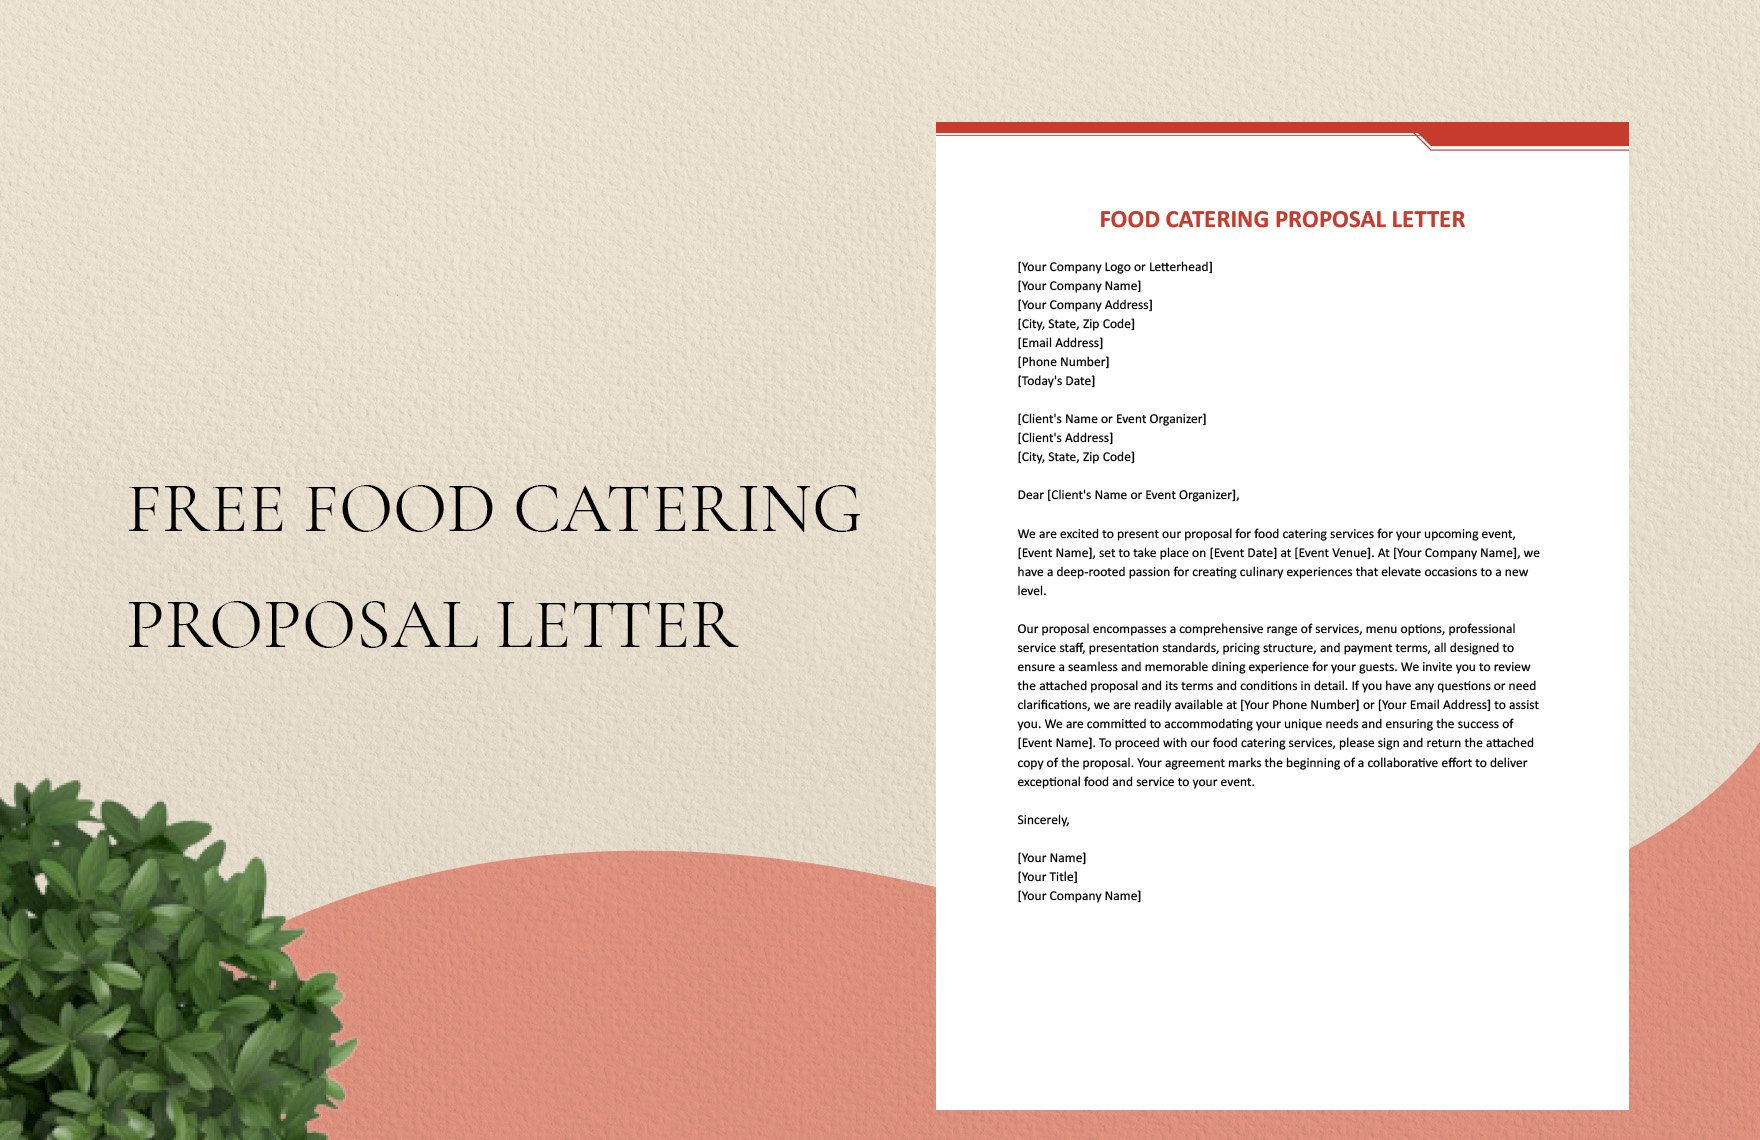 Free Food Catering Proposal Letter